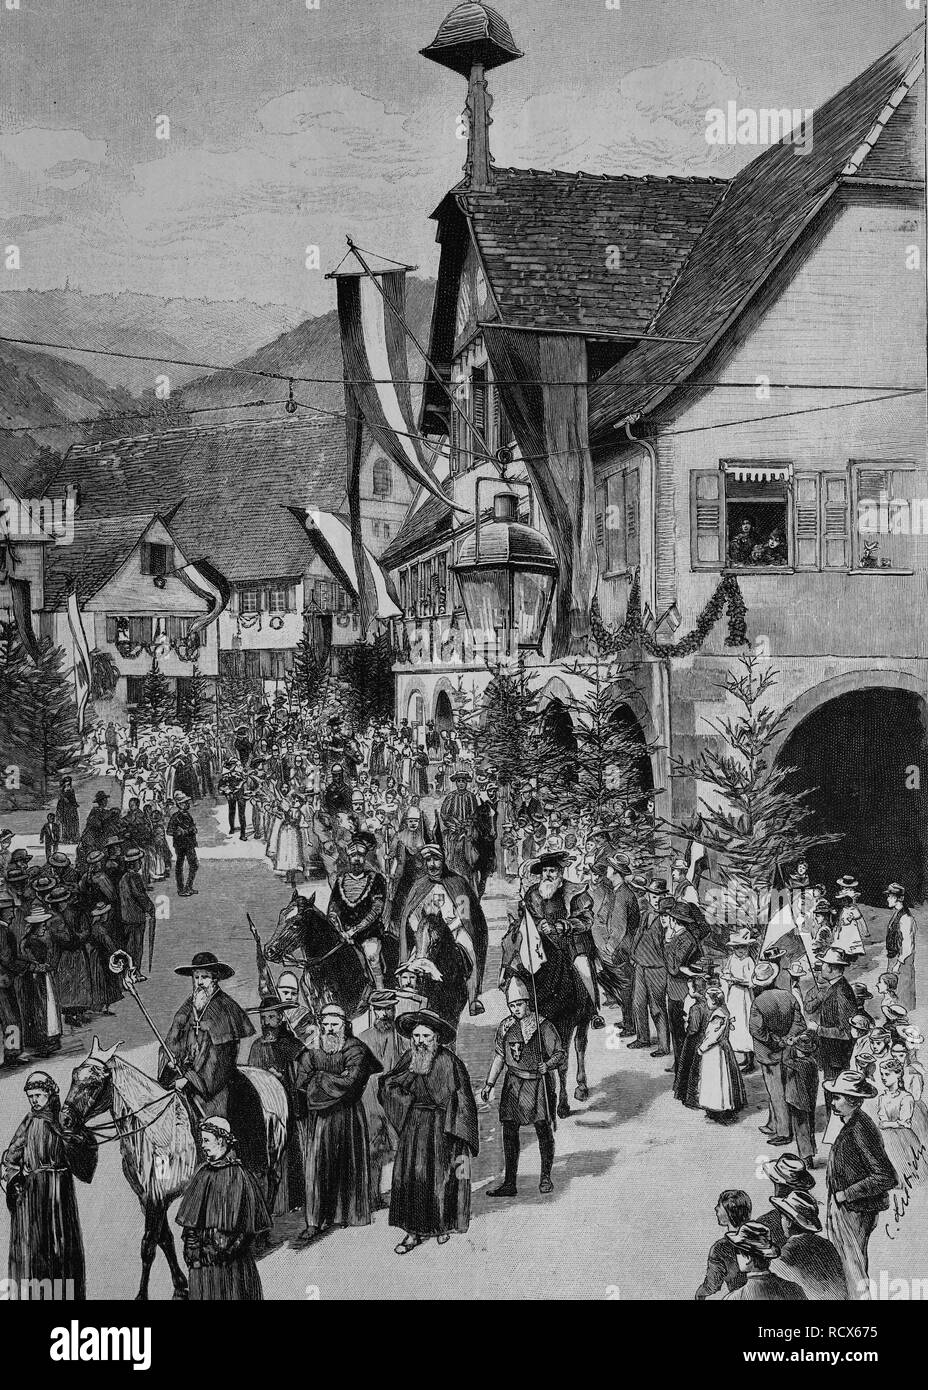 Parade at the Jubelfeier fest in Alpirsbach in the Black Forest, Germany, wood engraving, about 1884 Stock Photo